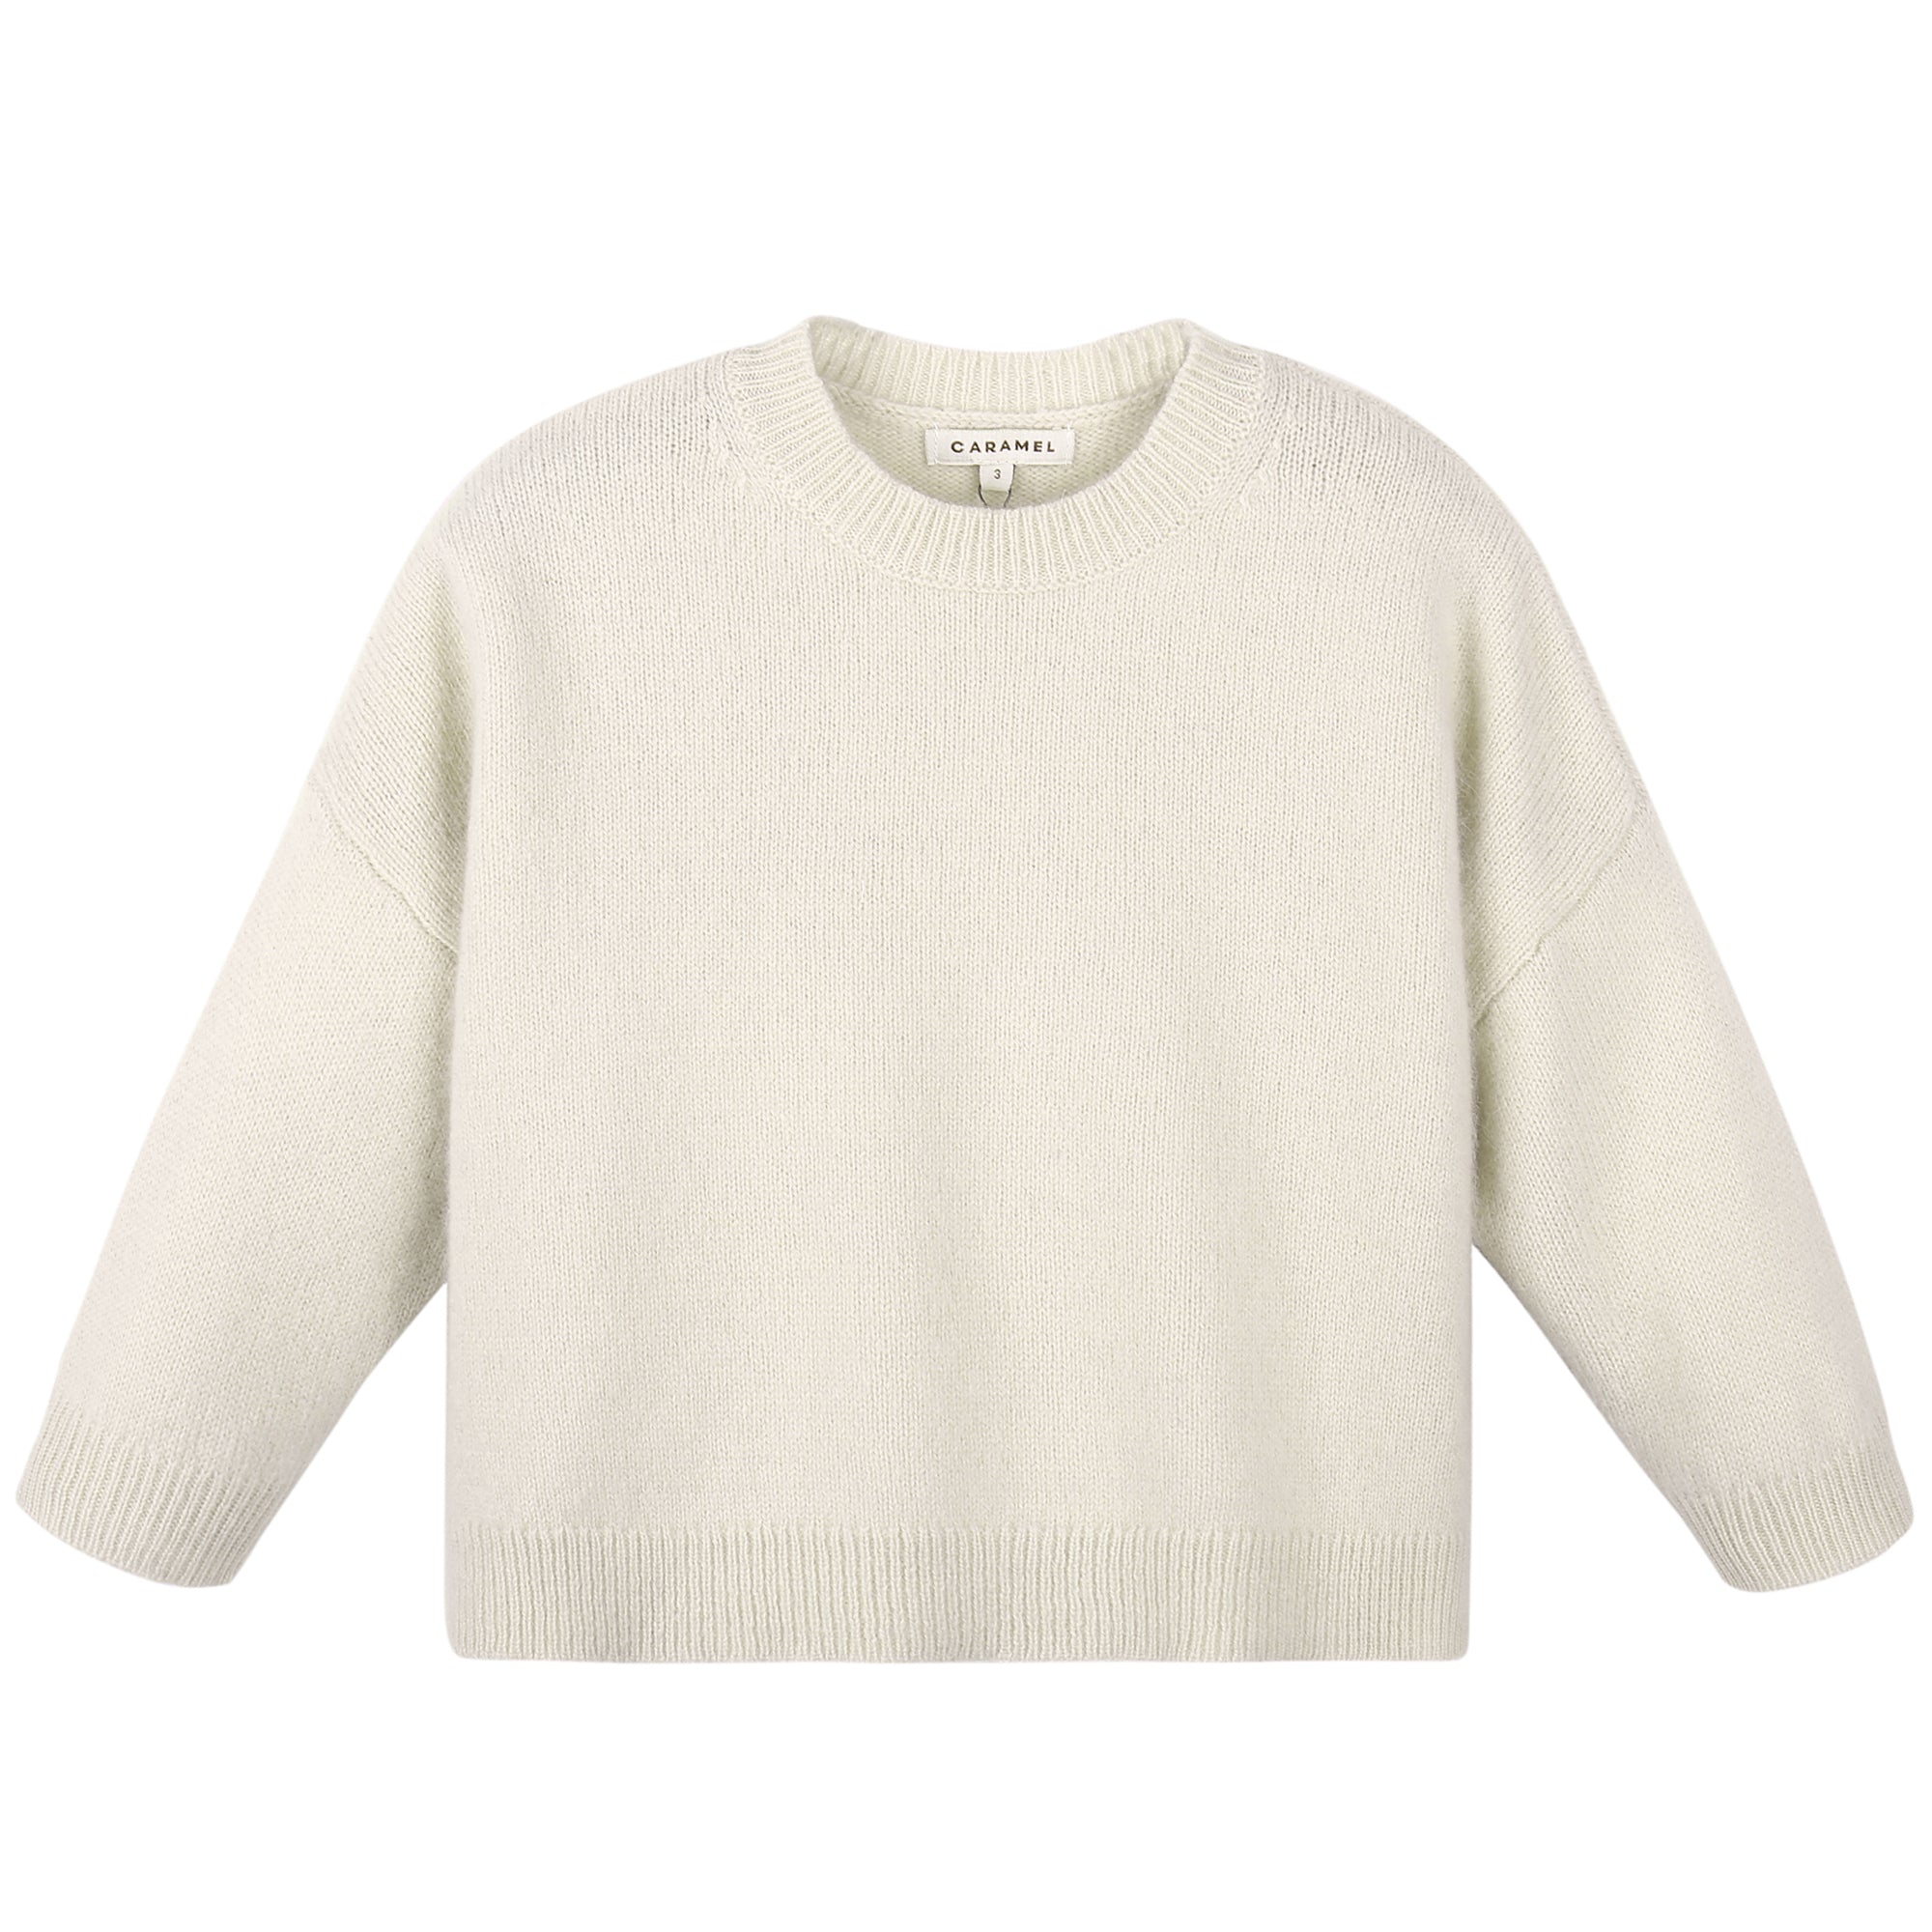 Boys & Girls Ivory Knitted Sweater